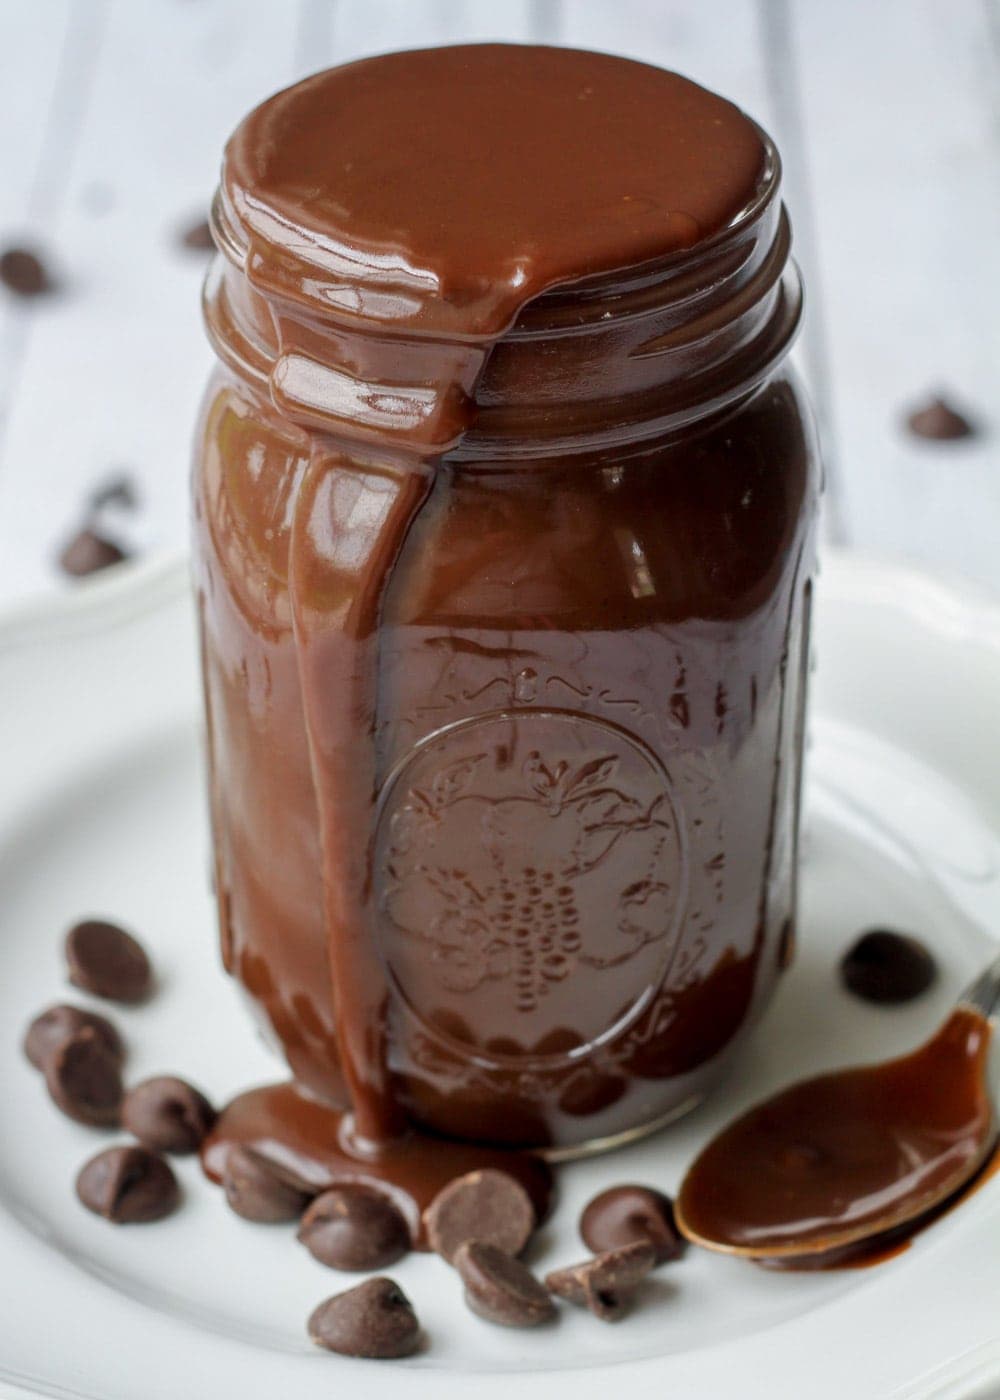 Our favorite hot fudge sauce recipe oozing from jar